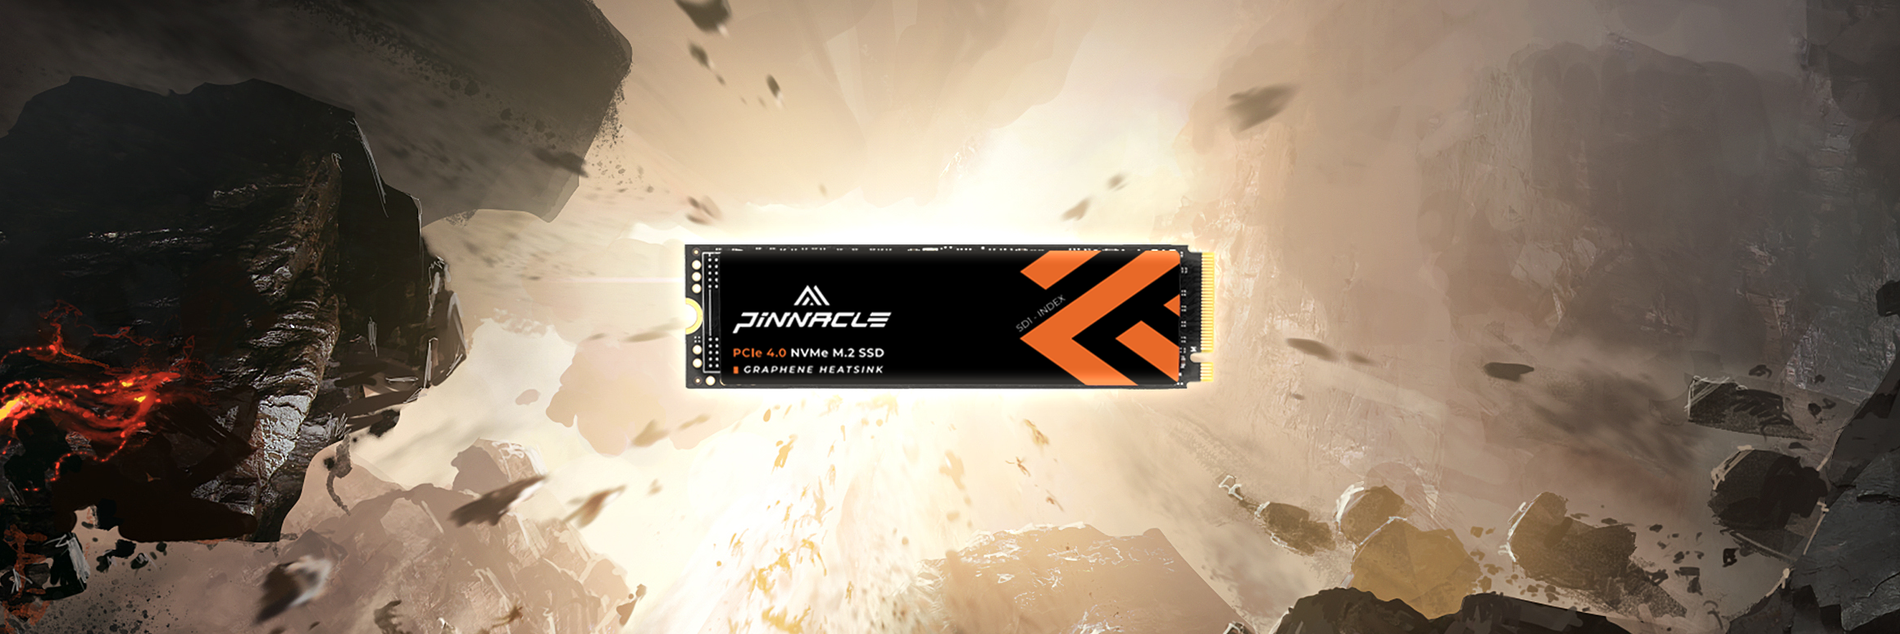 PINNACLE SD1-INDEX M.2 PCIe Gen 4 Hits The Market Now!